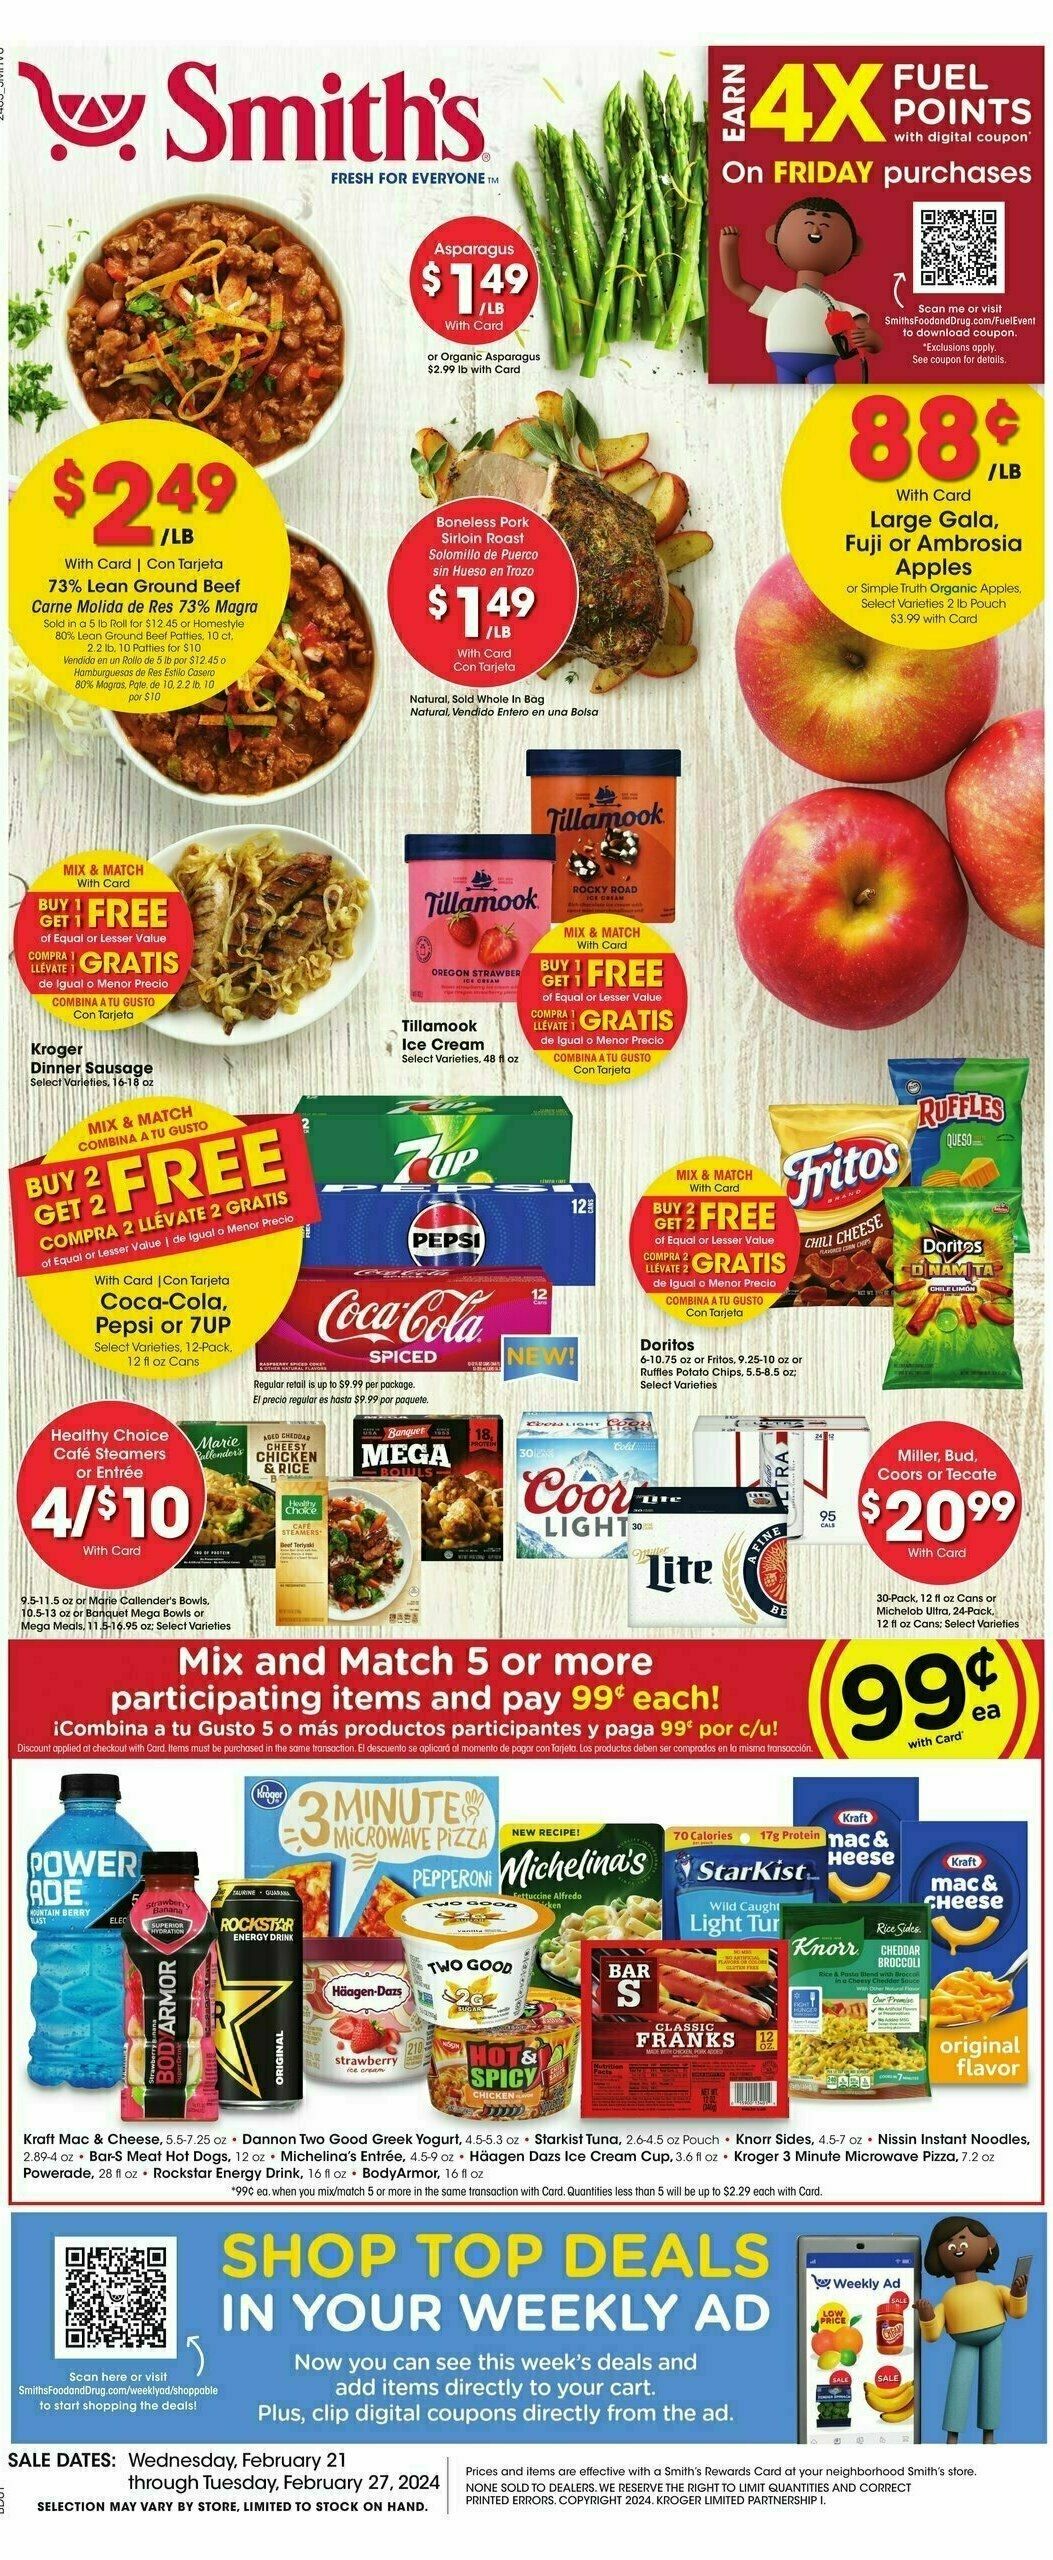 Smith's Weekly Ad from February 21